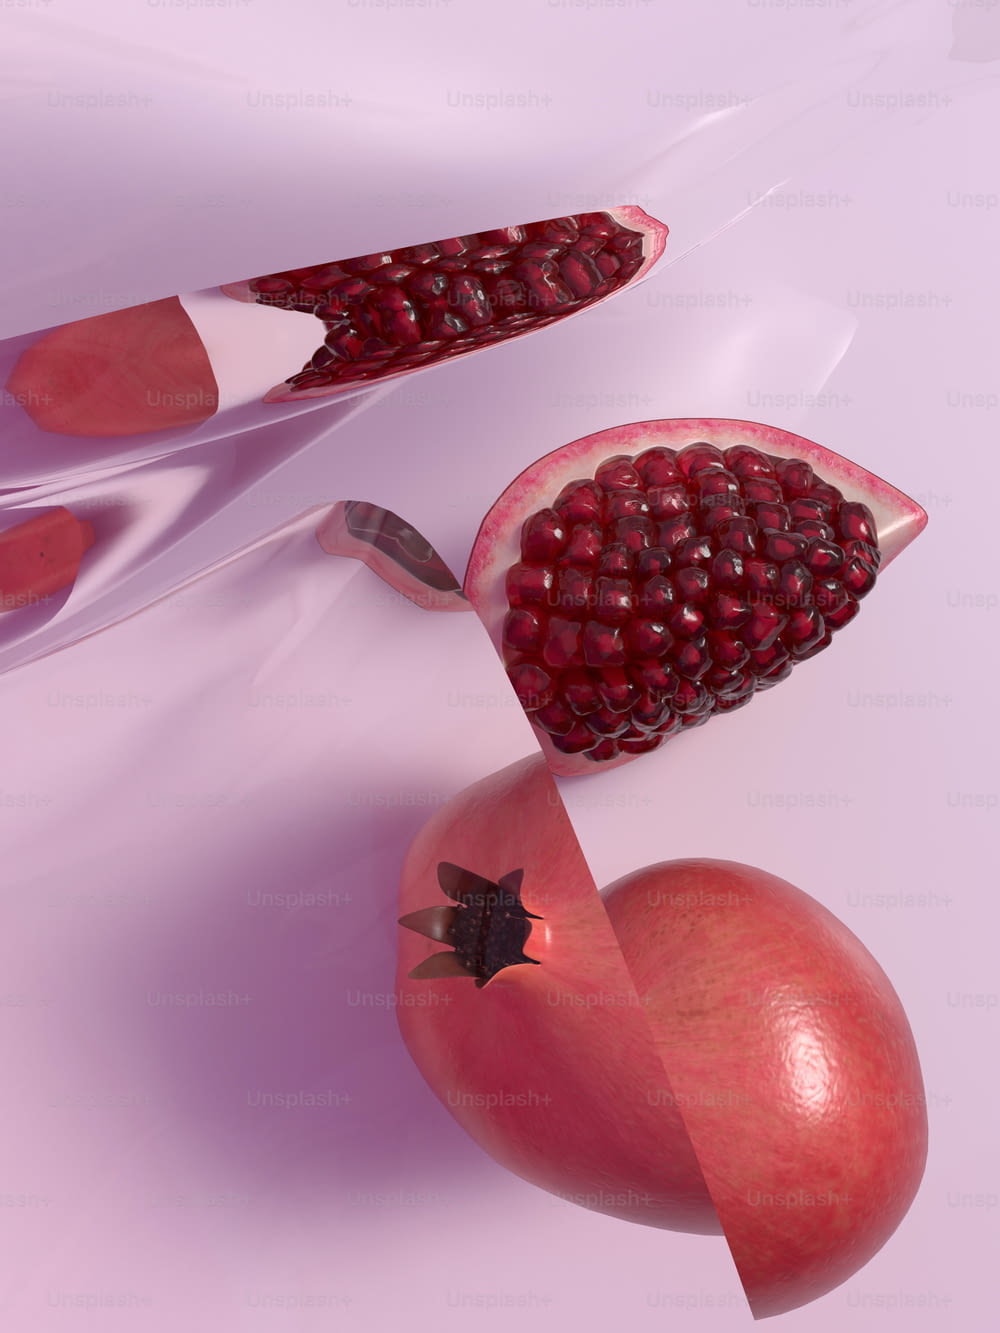 a cut in half pomegranate and a whole pomegranate on